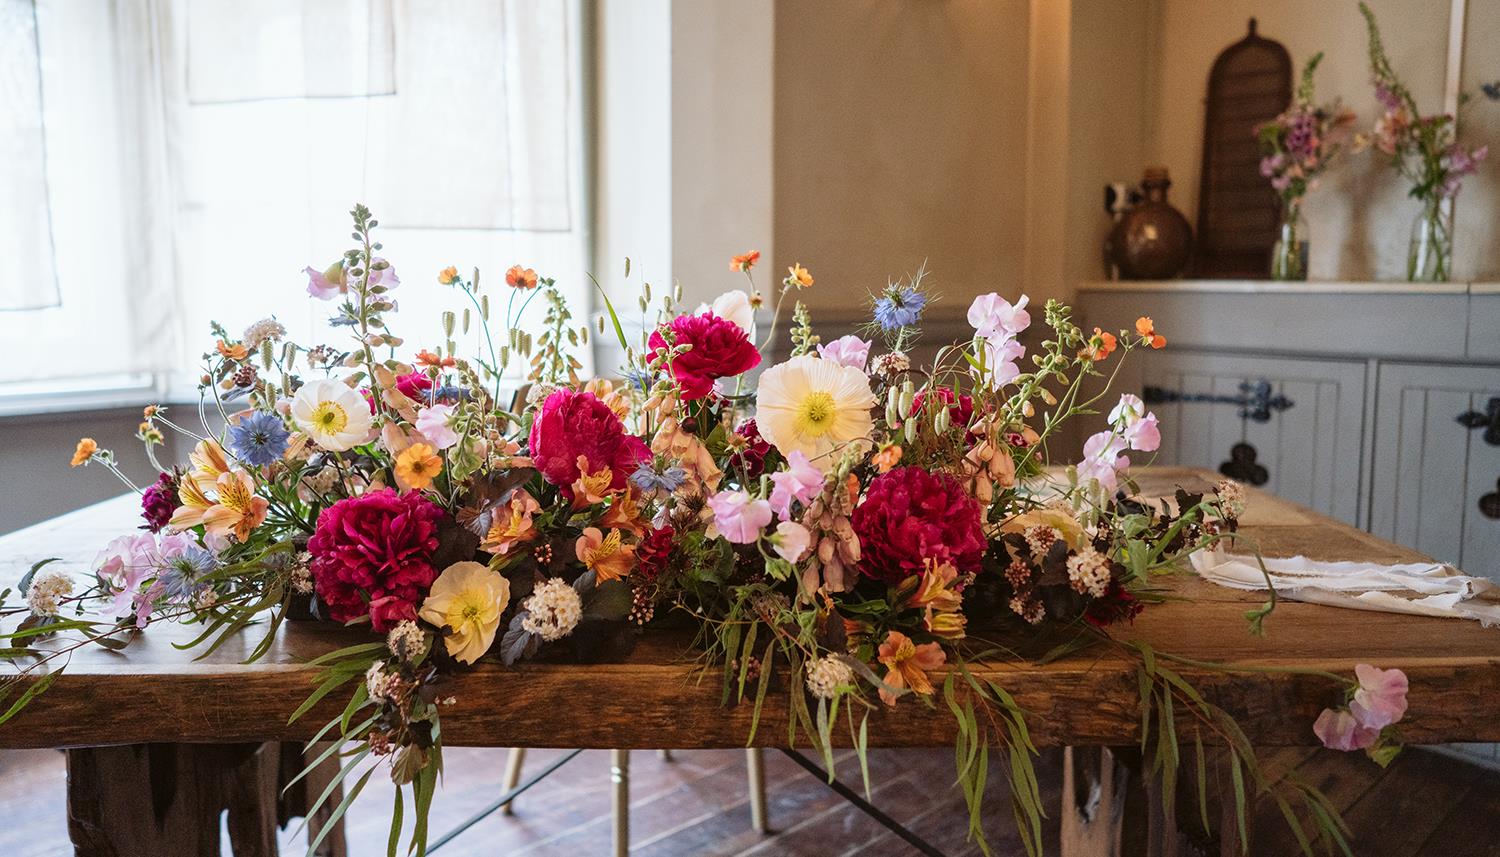 Flowers on table. Photo Credit: Lee Dann Photography